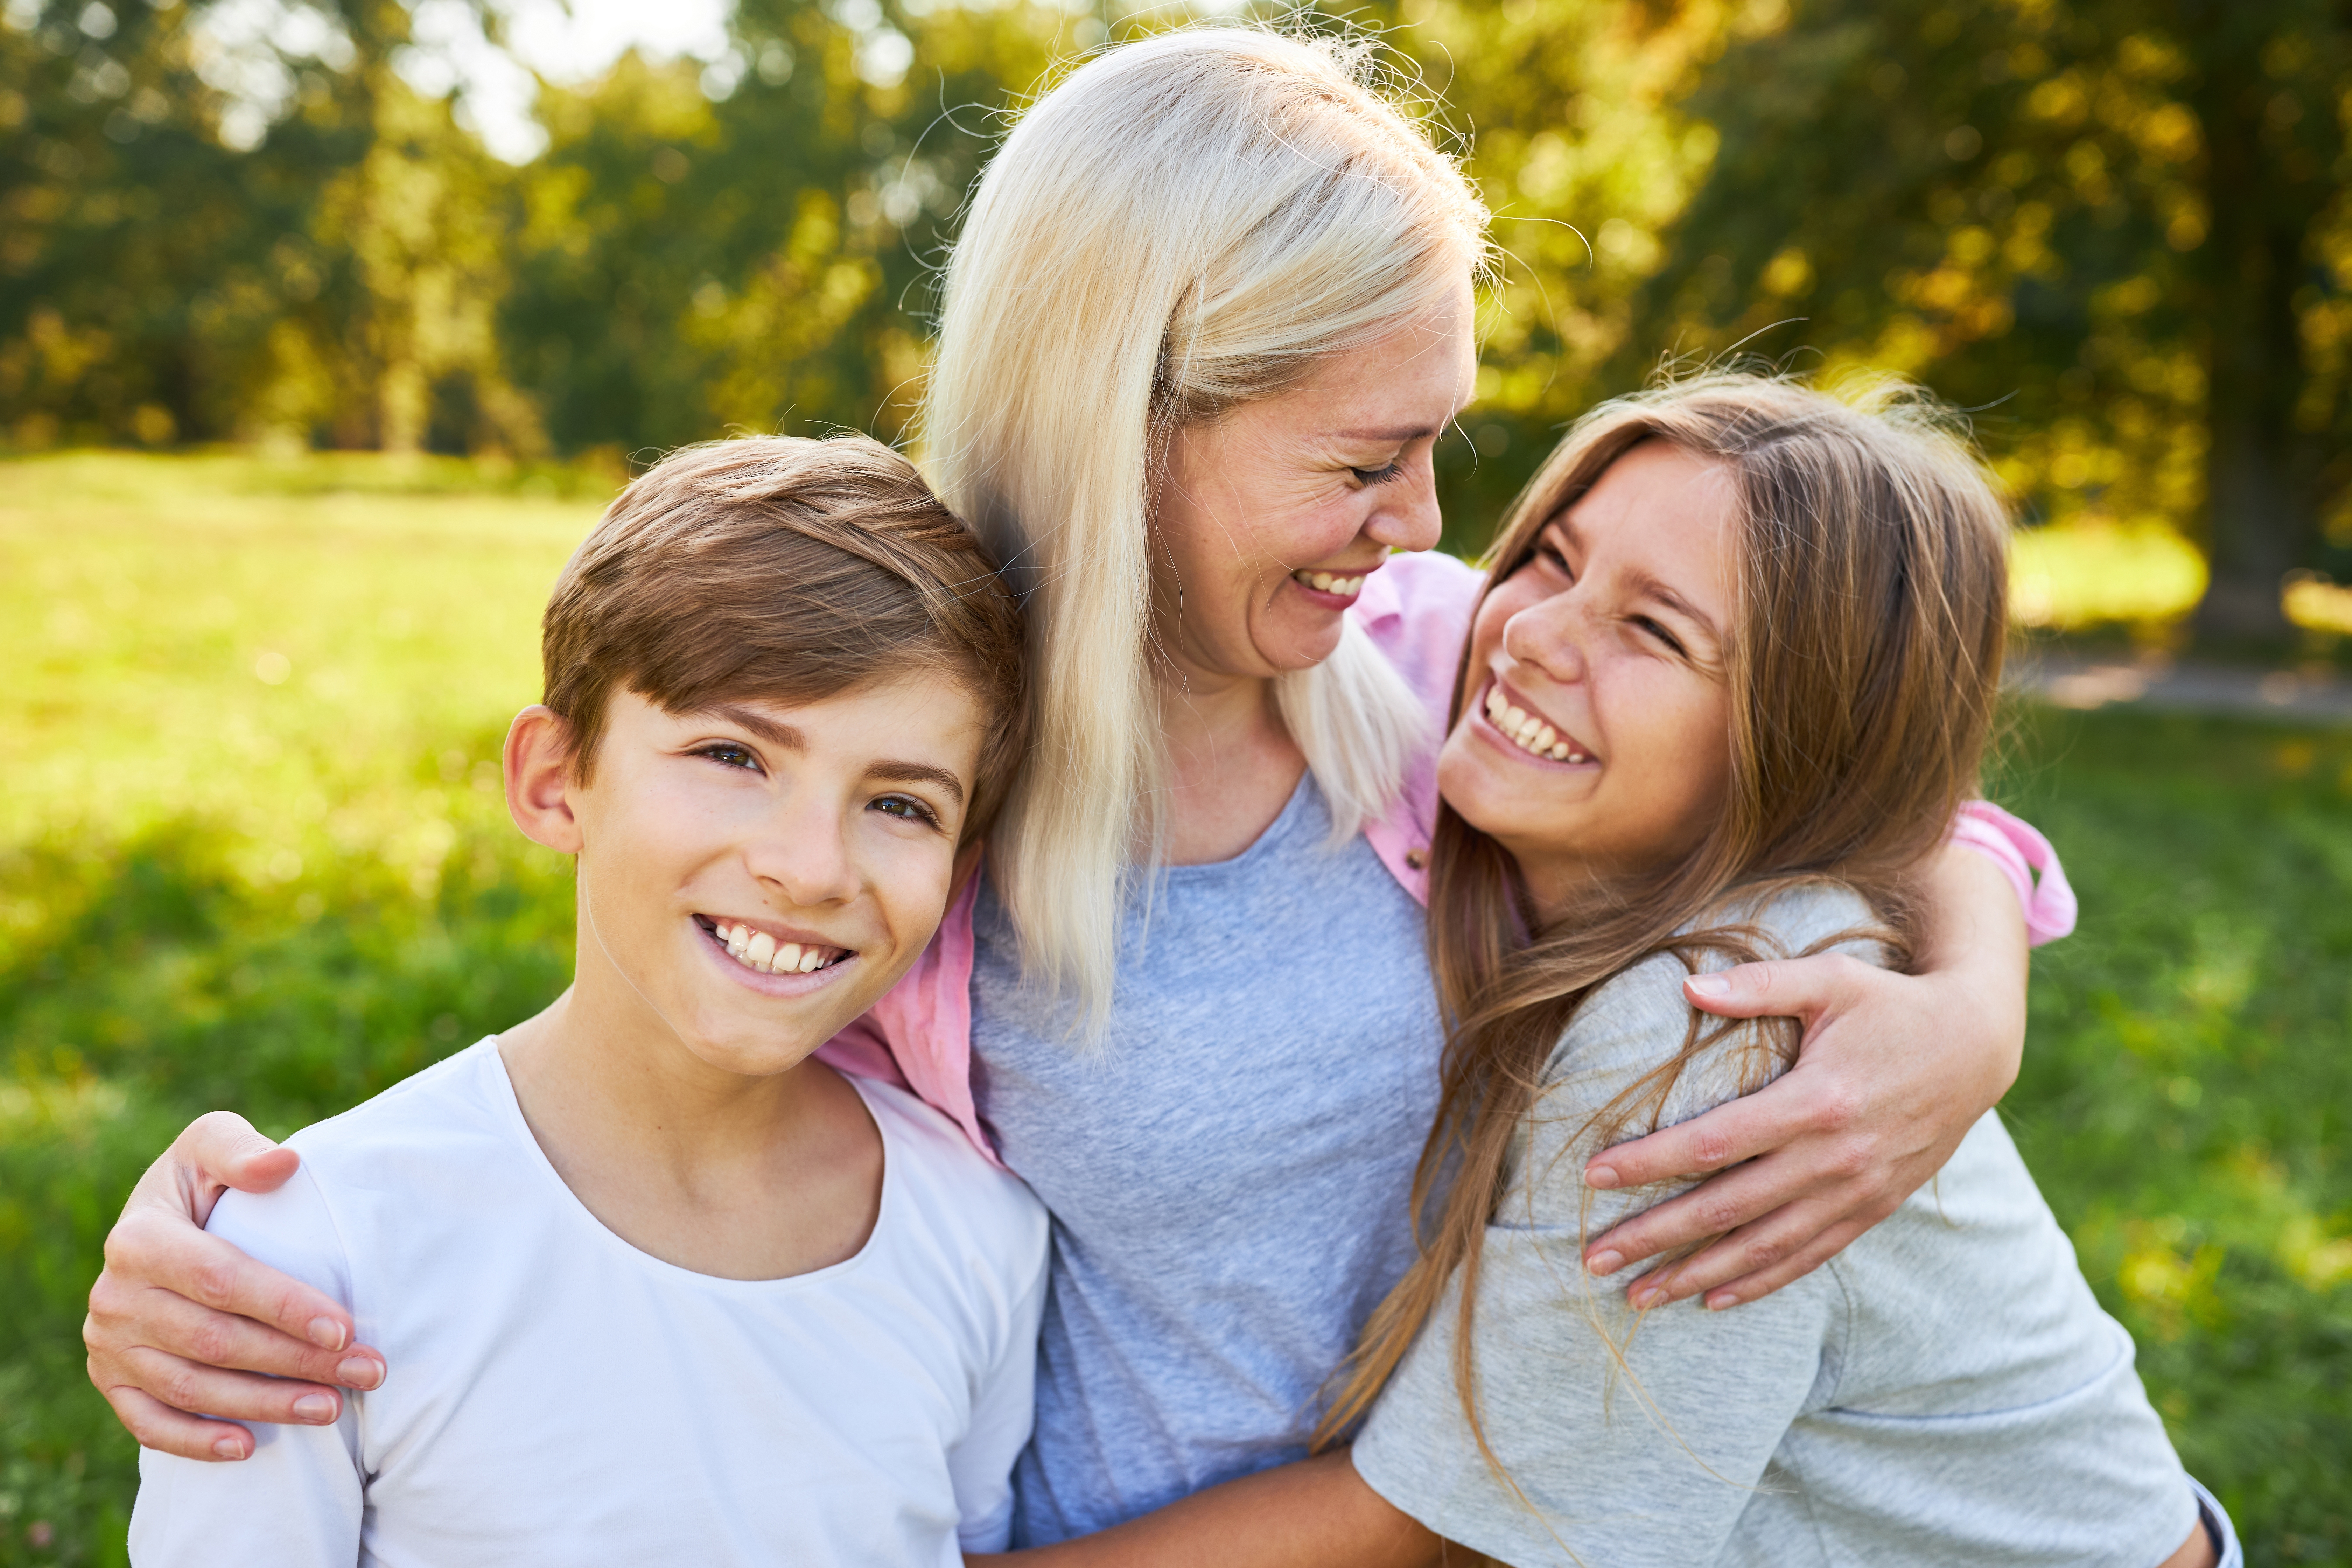 A happy mother hugging her two children outdoors | Source: Shutterstock